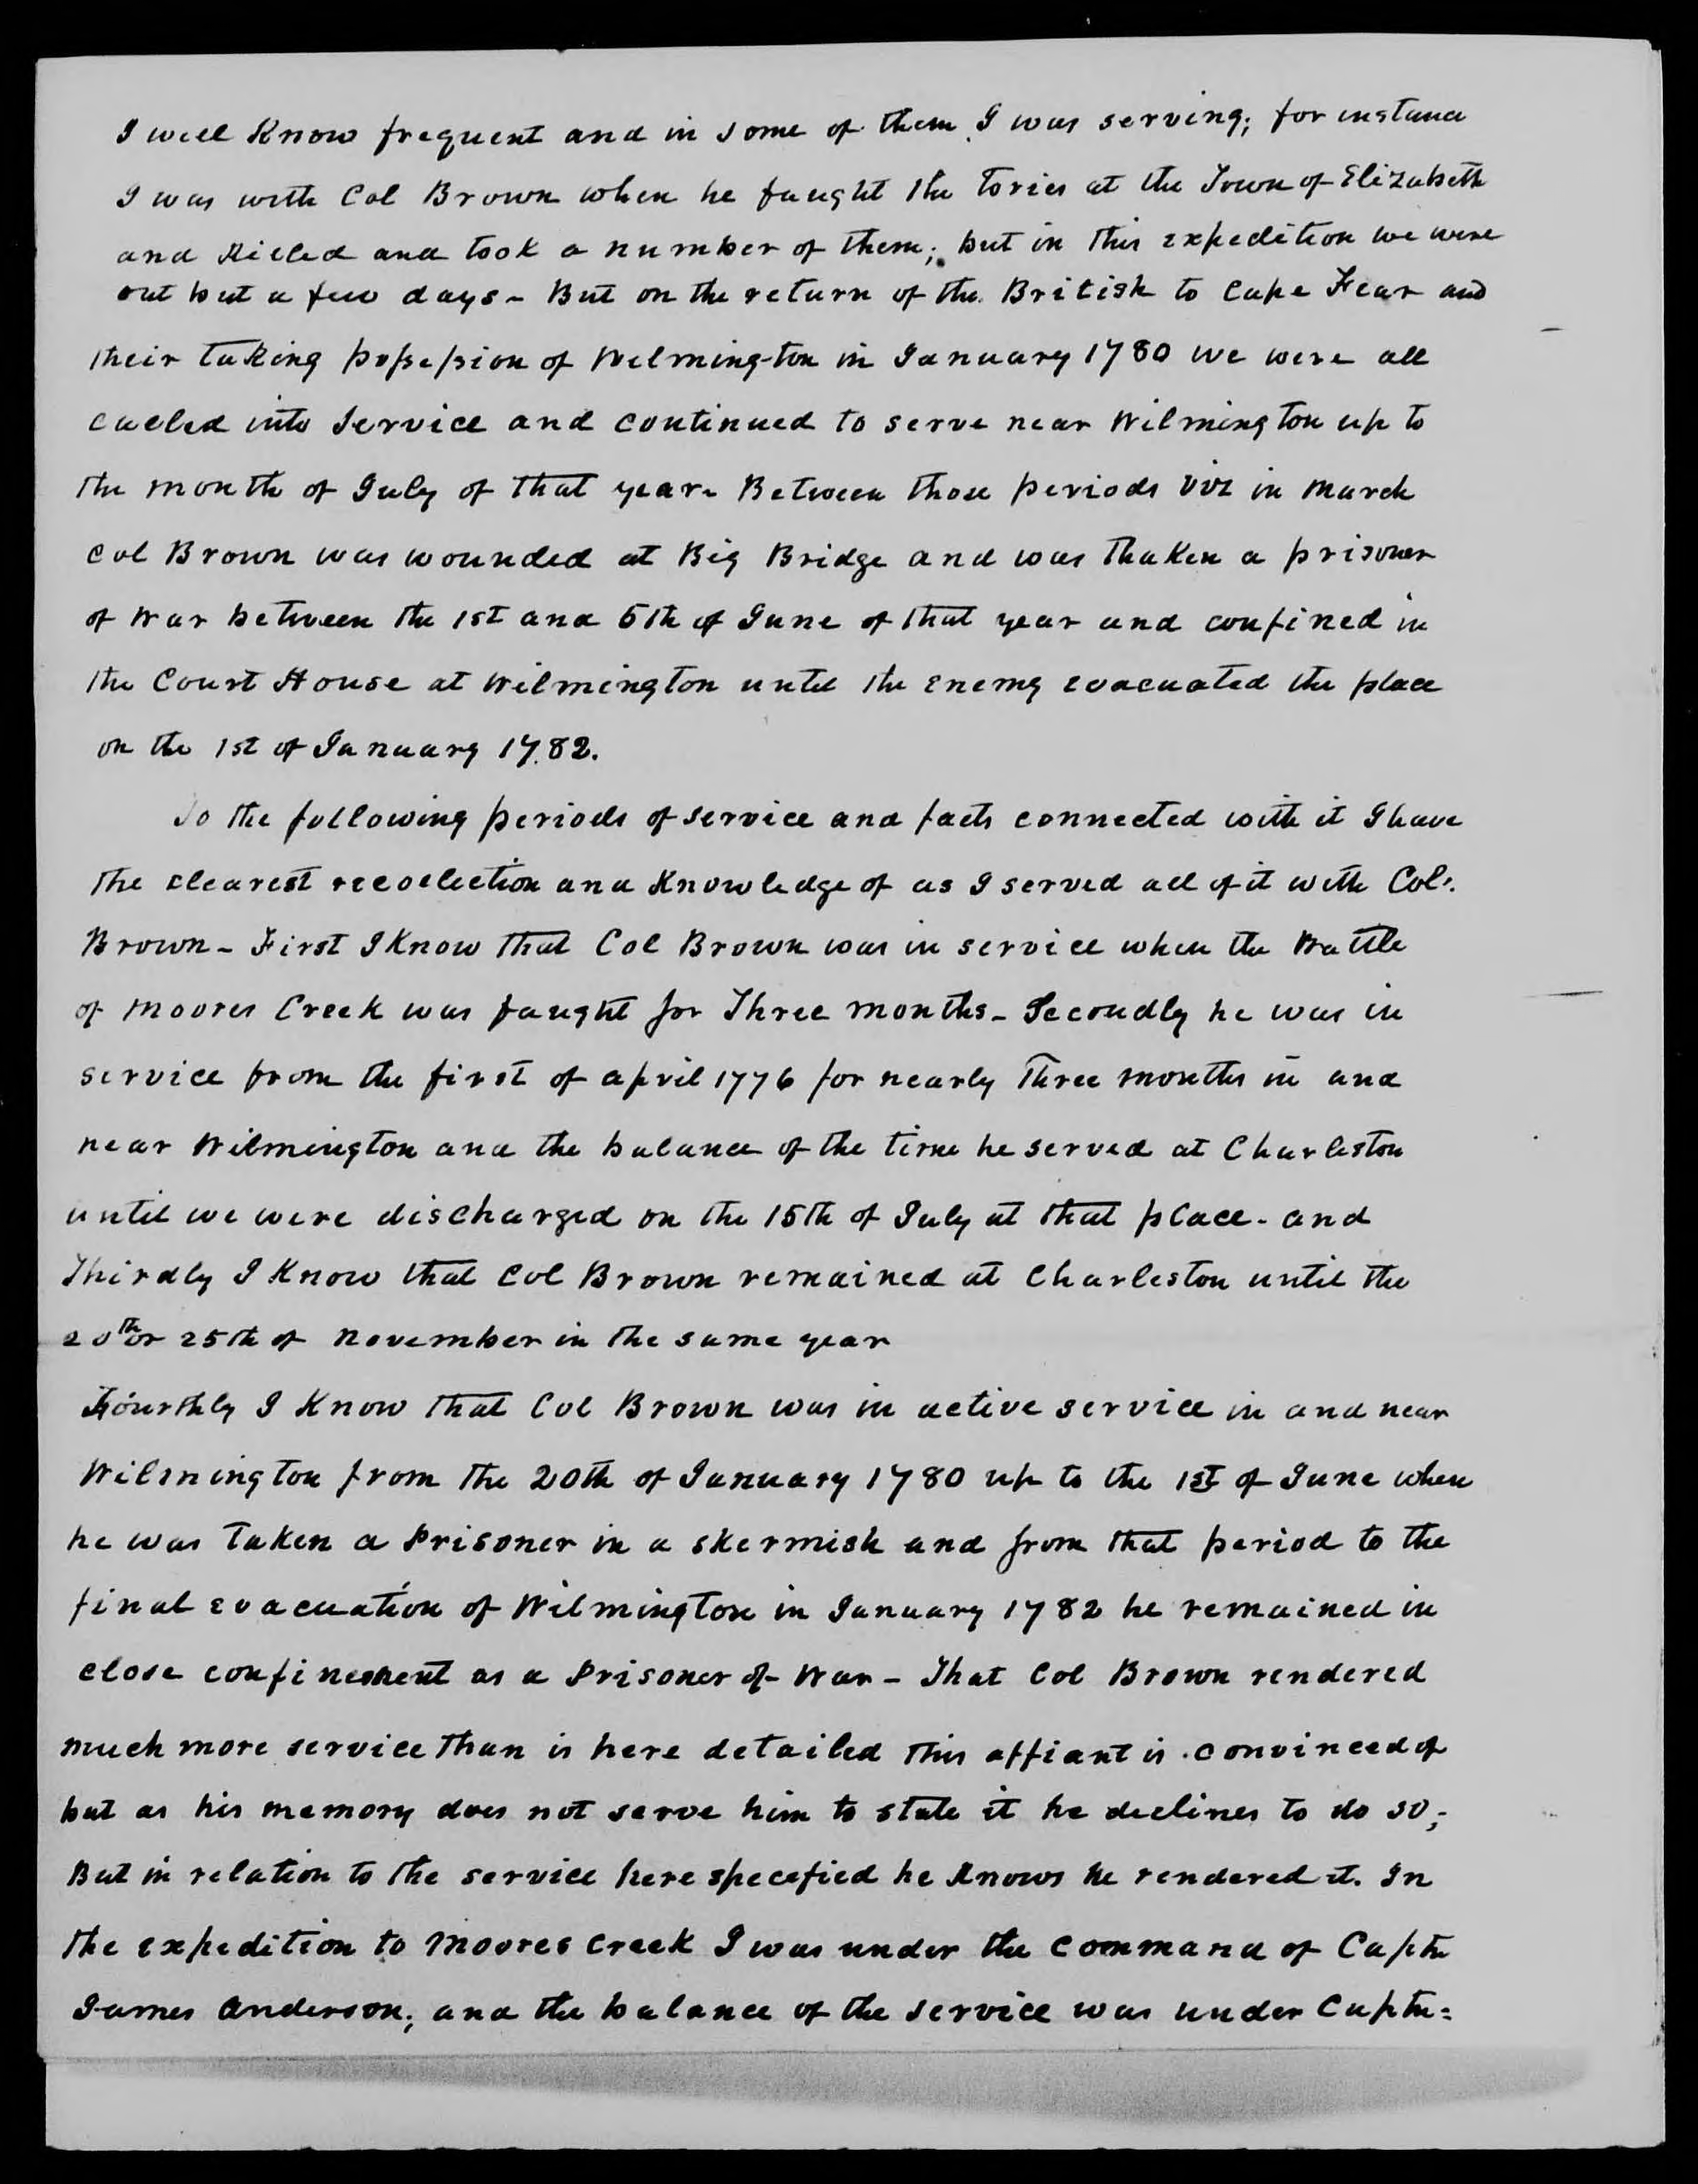 Affidavit of James Anders (amended) in support of a Pension Claim for Lucy Brown, 7 June 1839, page 2